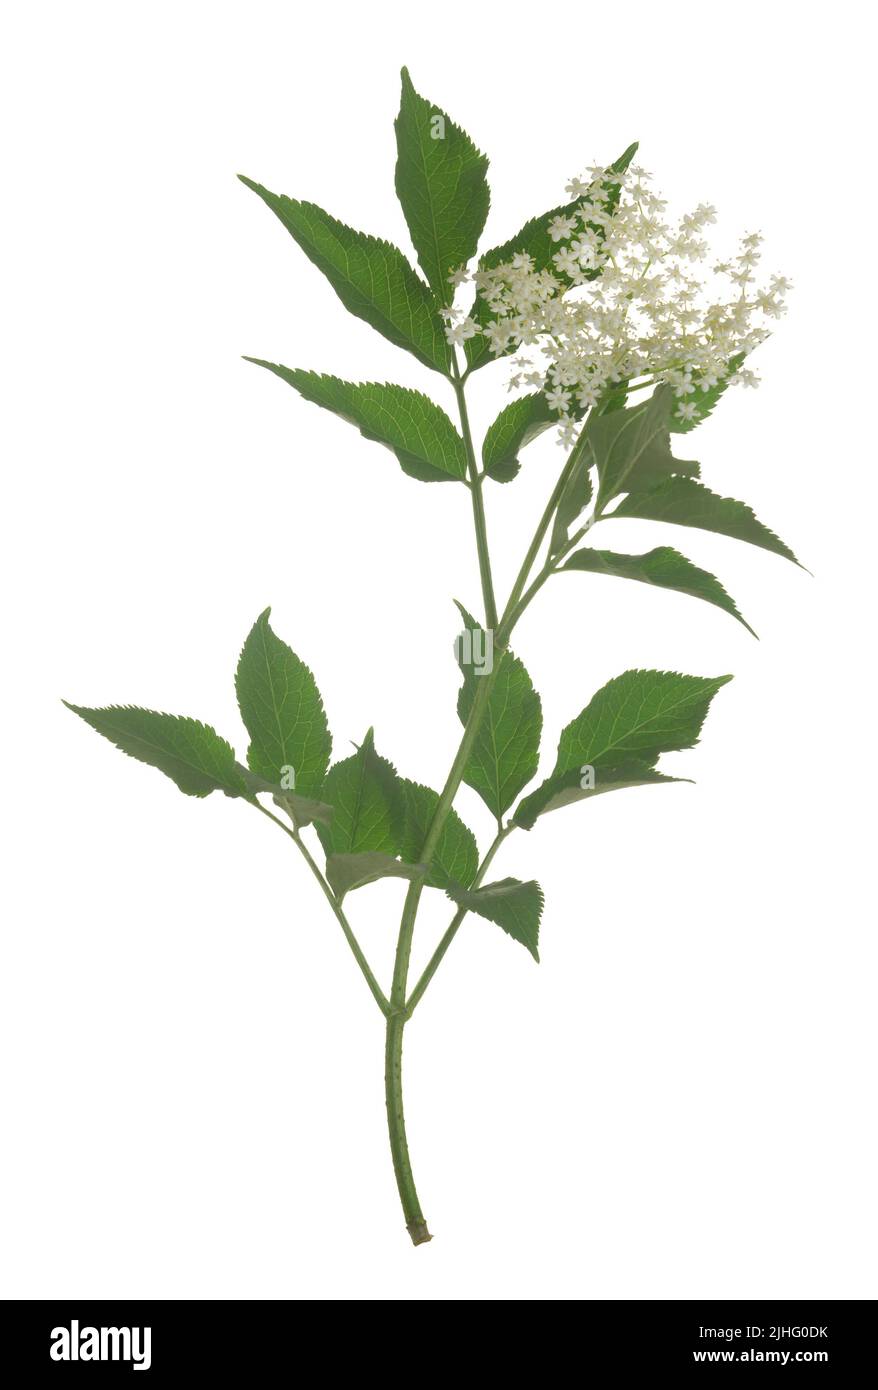 Blossoming Black elder, Sambucus nigra twig isolated on white background, the flowers are often used for making cordial Stock Photo